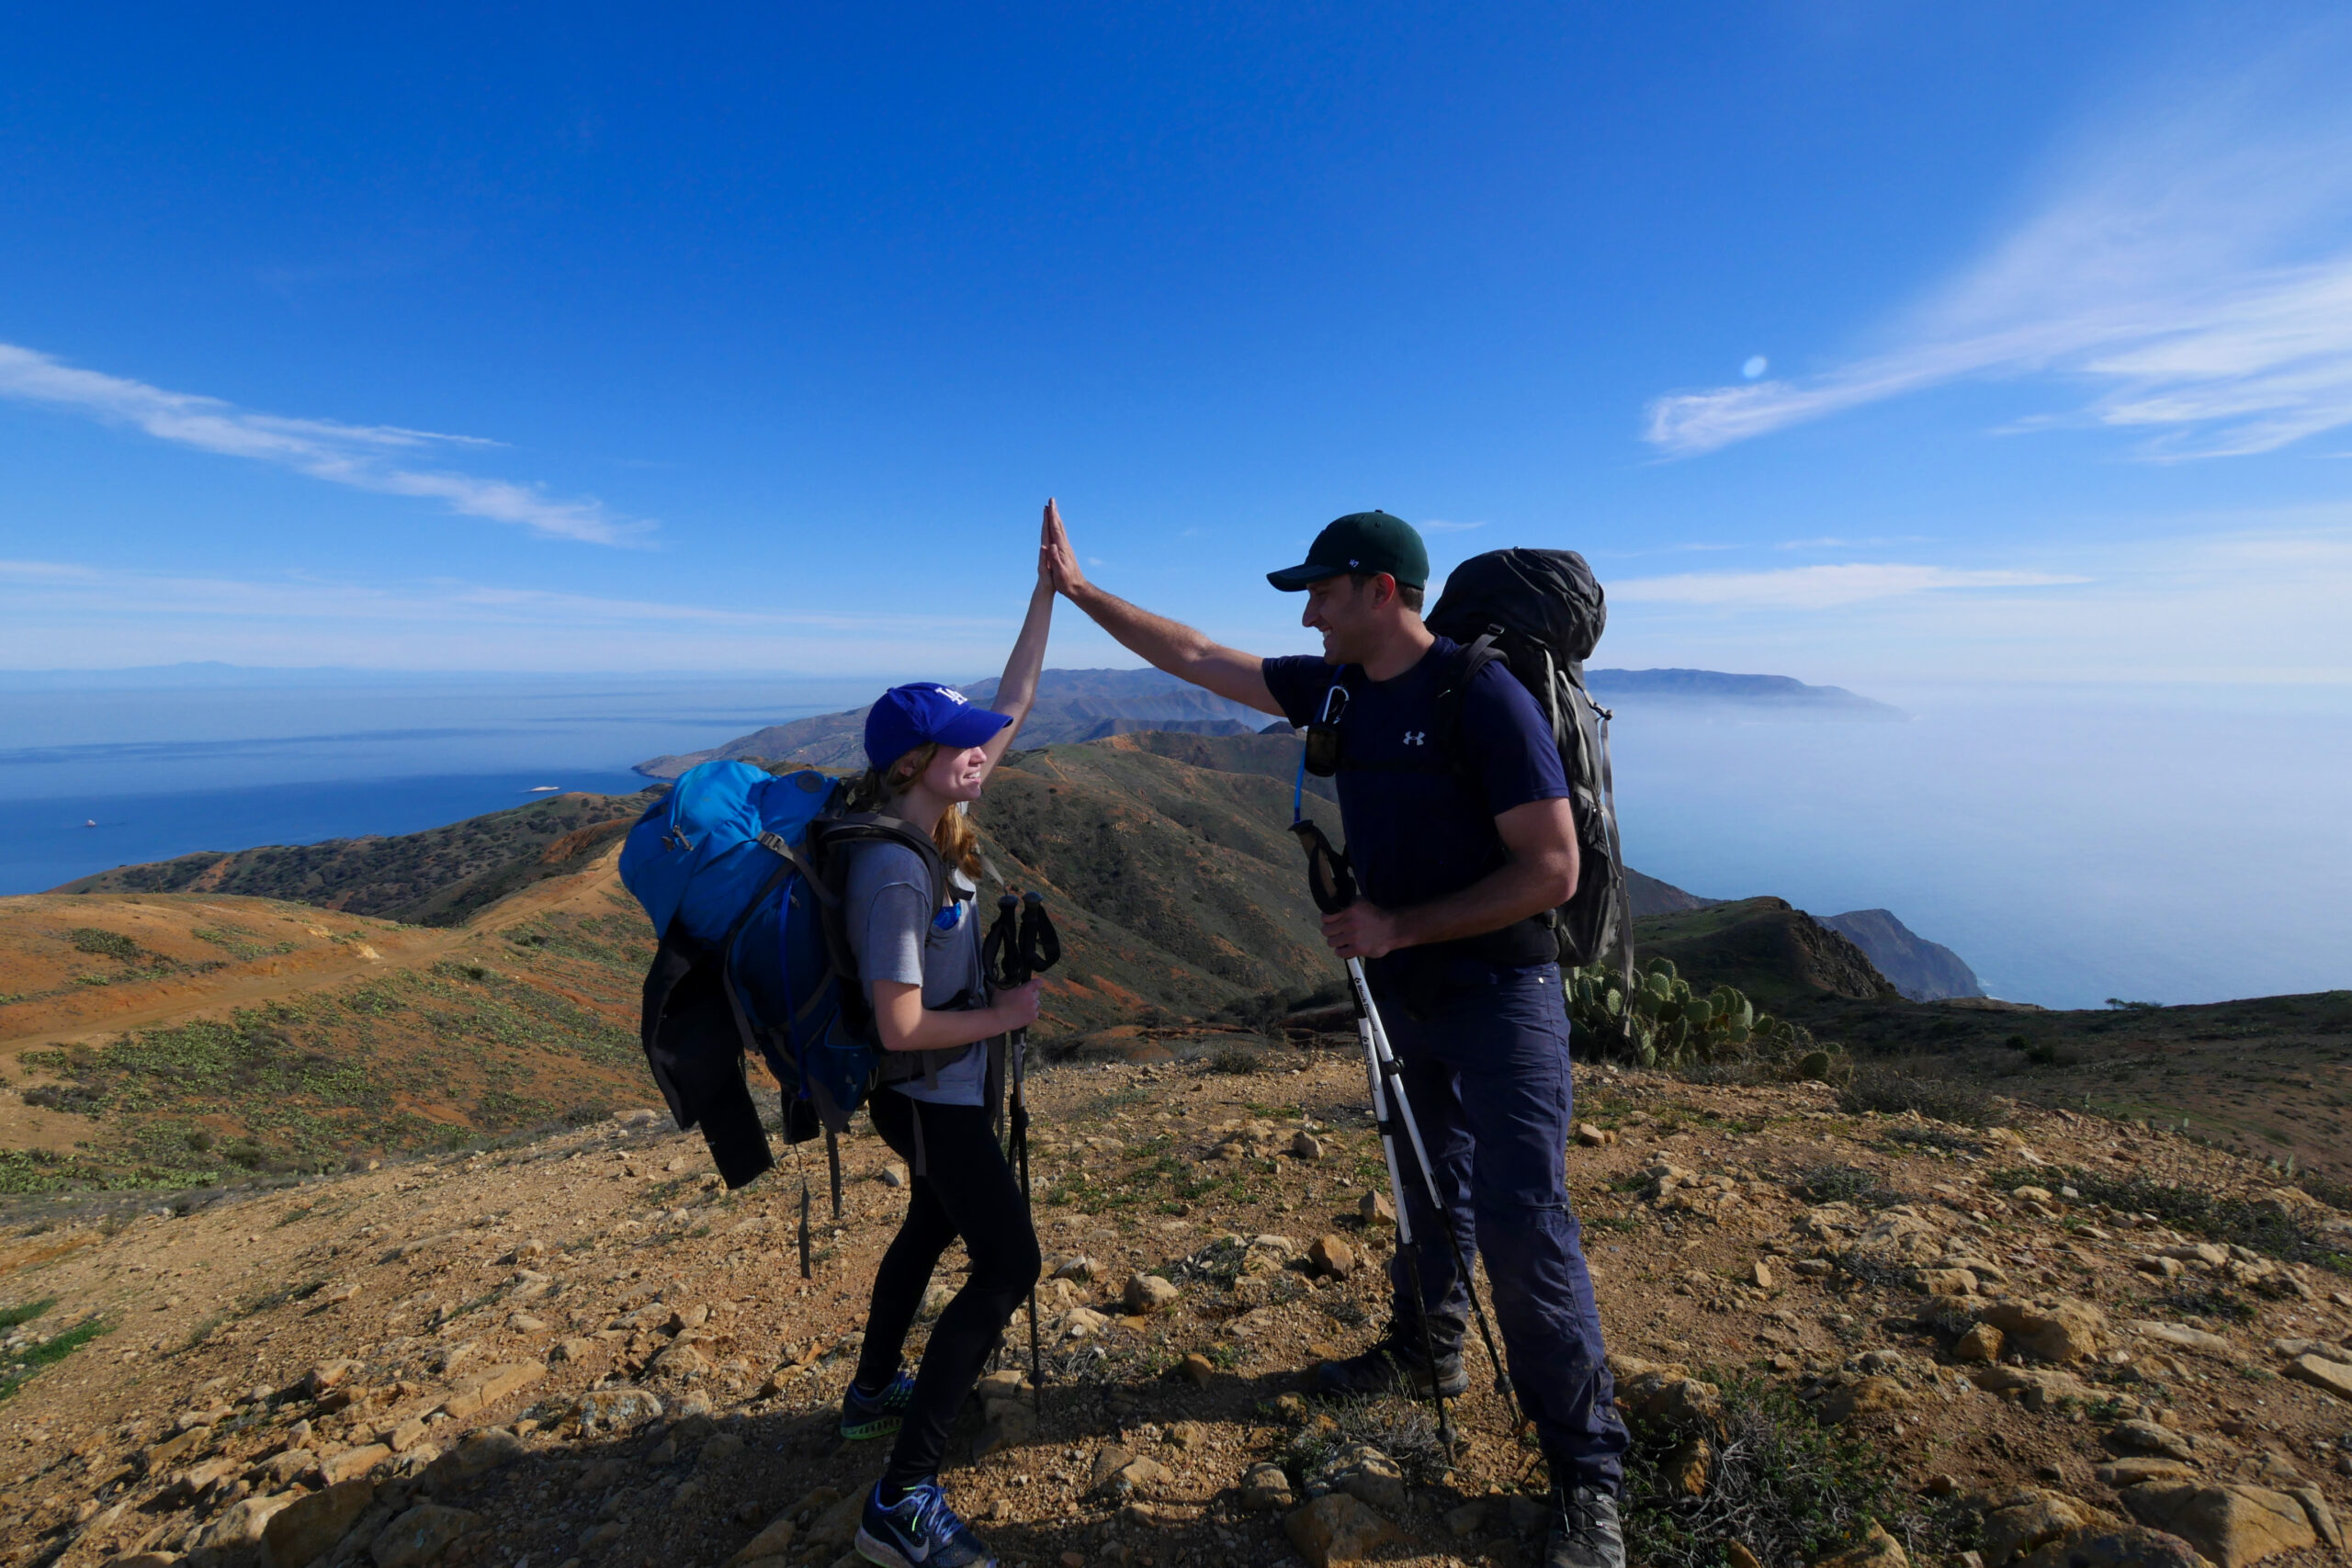 Hikers high-five at the Trans-Catalina Trail's high point at 1,800 feet.